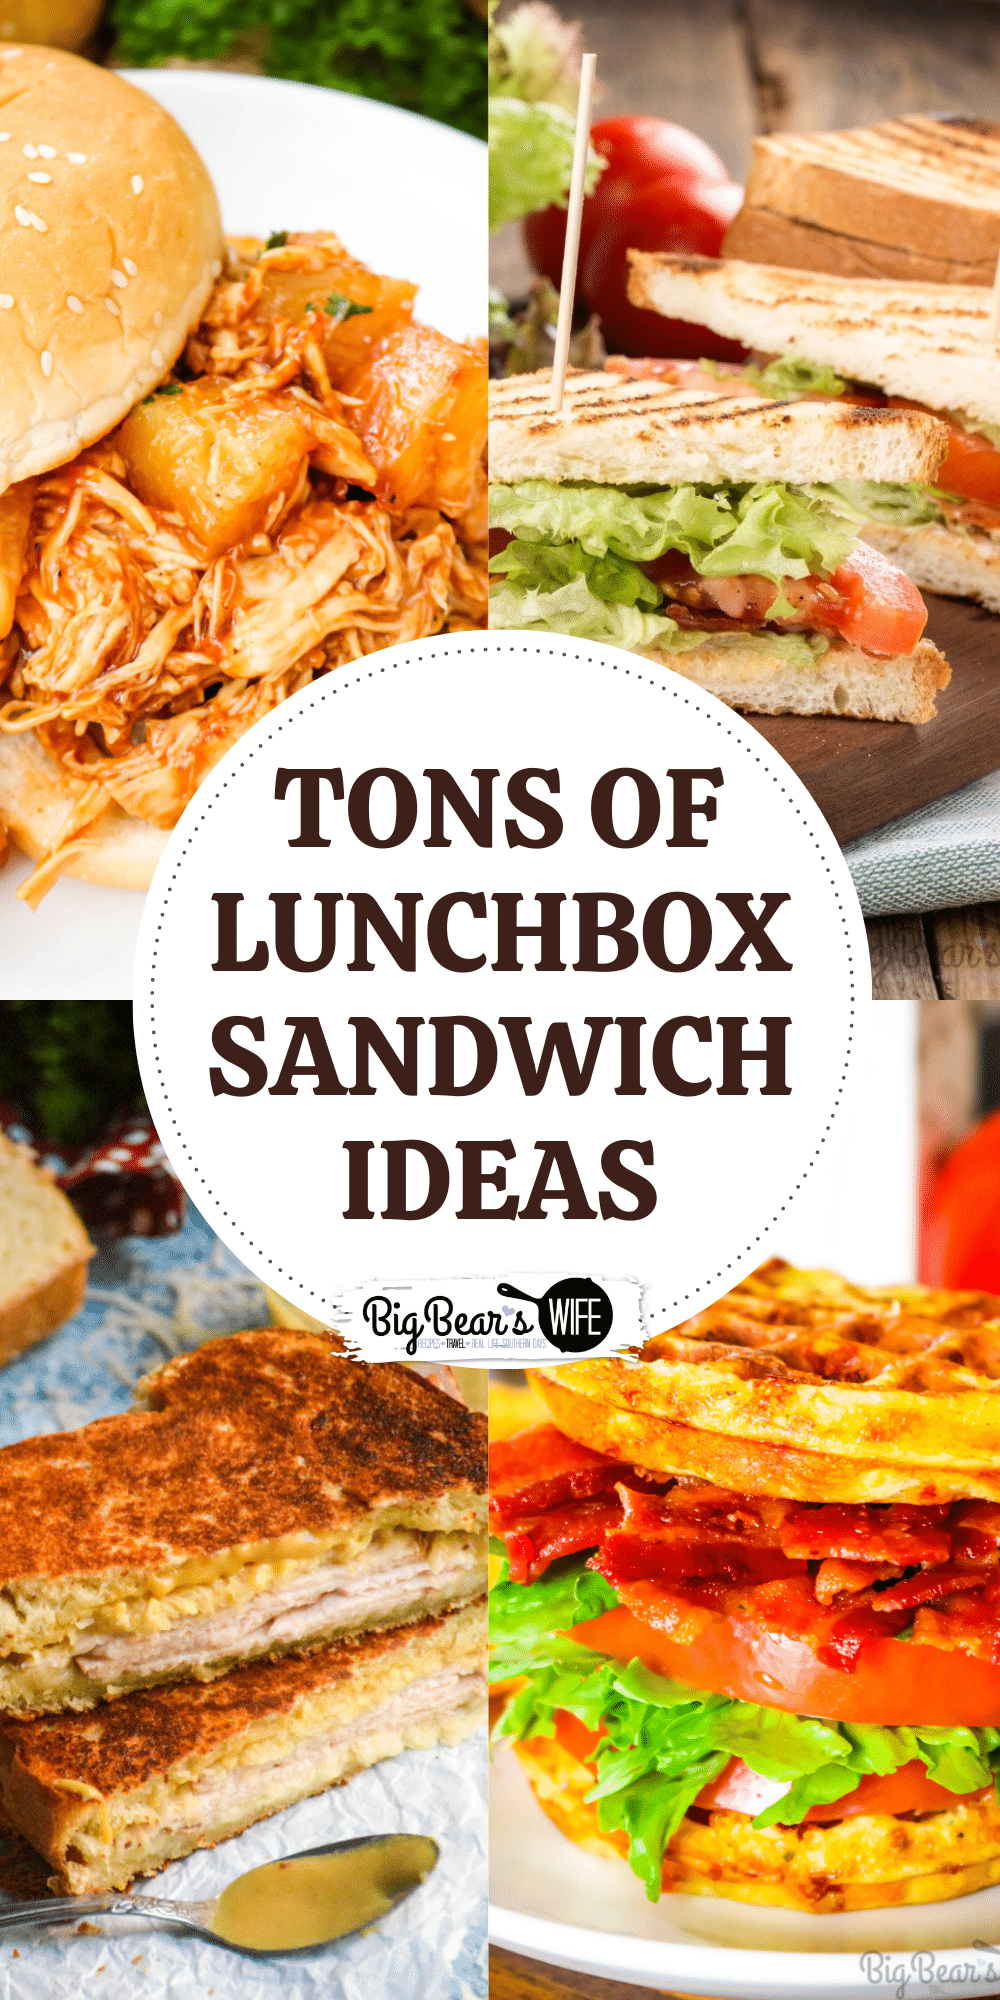 If you need to pack lunches for school or work this year, you're going to want these recipes, ideas and tips and tricks with all of these Lunchbox Sandwich Ideas! via @bigbearswife